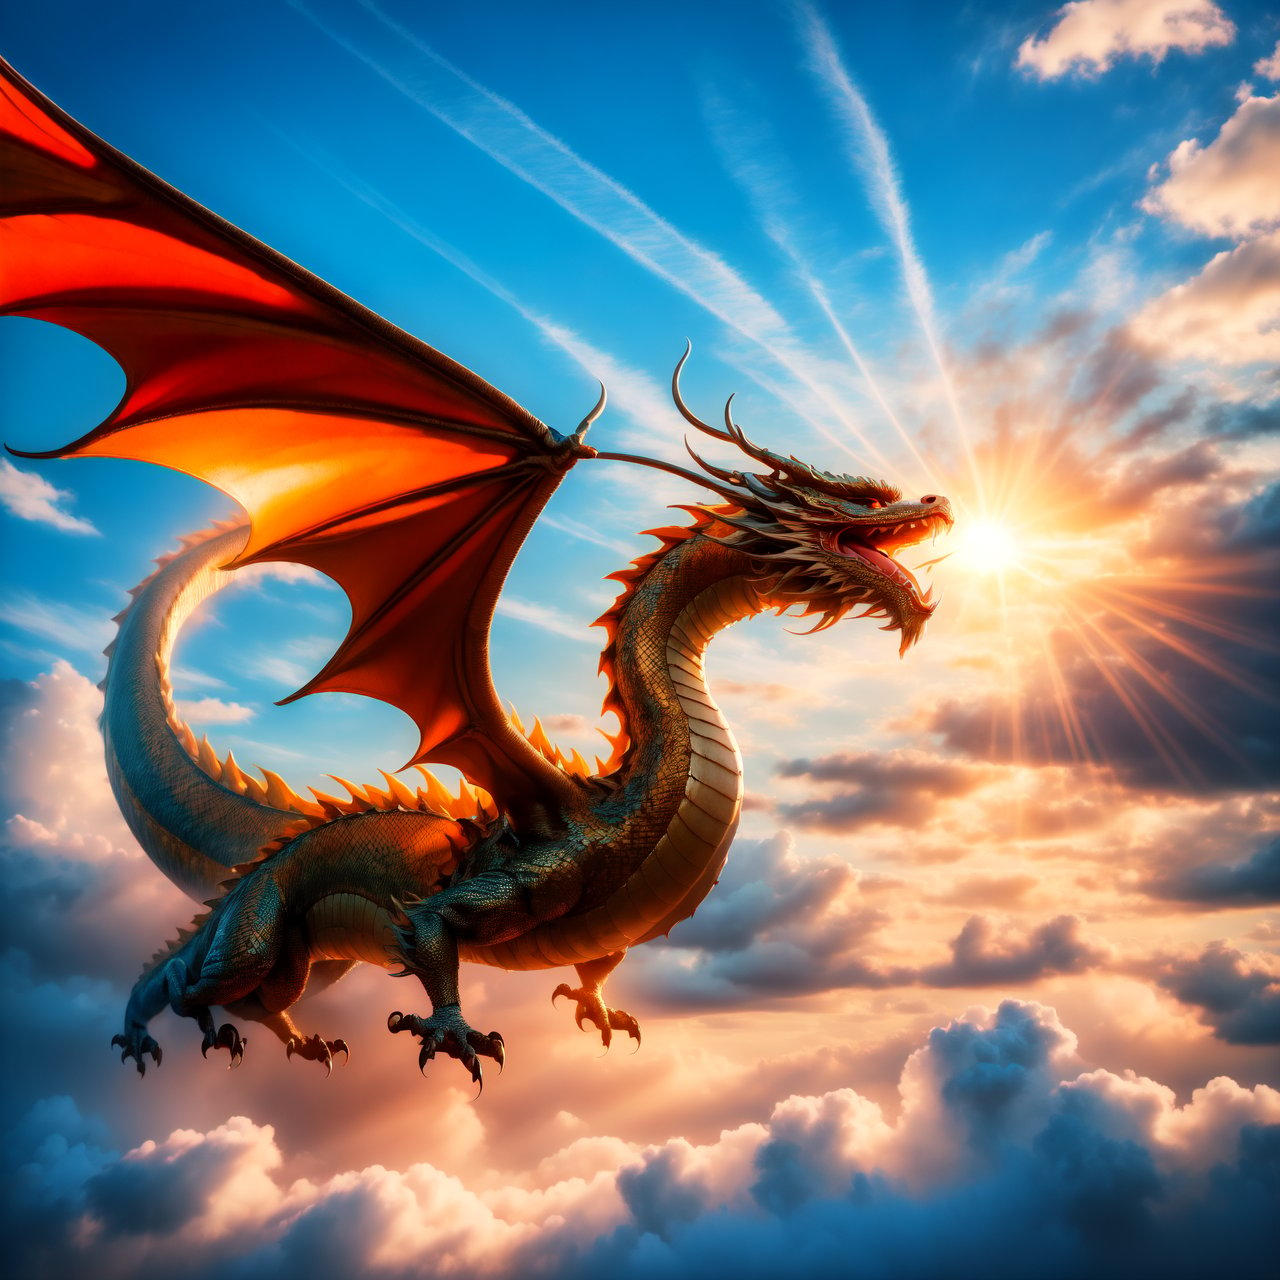 Create a photo-realistic and awe-inspiring image of Yinglong, the most ancient dragon in Chinese mythology, dynamically soaring through the sky. The dragon should have a realistic texture, powerfully ascending towards the sun and navigating through auspicious clouds. The scene should capture Yinglong's detailed scales and majestic form, with the sun's rays casting a radiant, golden light, accentuating its form against the backdrop of the auspicious clouds, creating a scene of grandeur and intense vitality.
By FuturEvoLab, (Masterpiece, Best Quality, 8k:1.2), (Ultra-Detailed, Highres, Extremely Detailed, Absurdres, Incredibly Absurdres, Huge Filesize:1.1), 